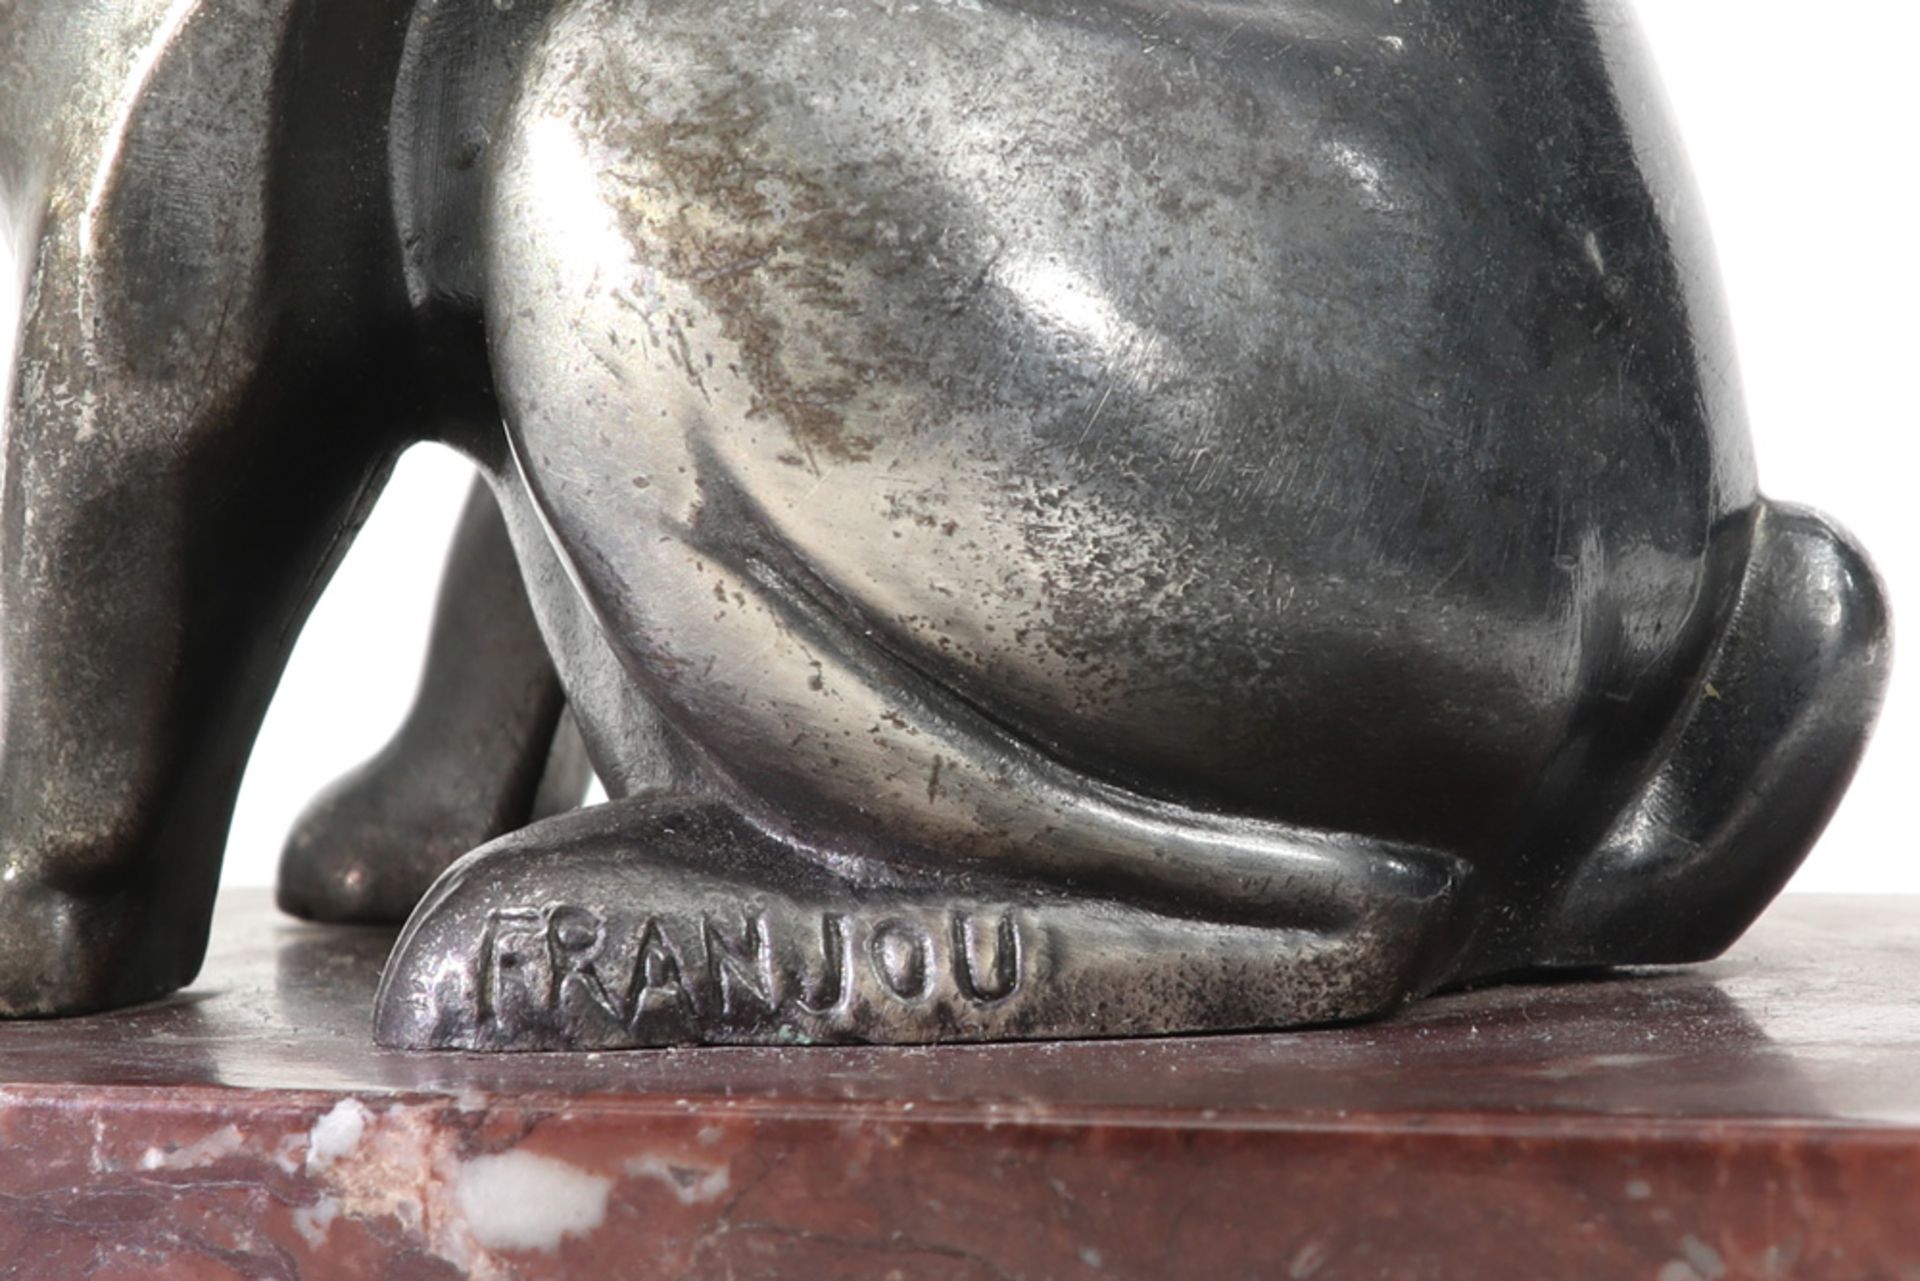 pair of Franjou signed Art Deco book-ends in marble and silverplated metal || FRANJOU paar Art - Image 3 of 3